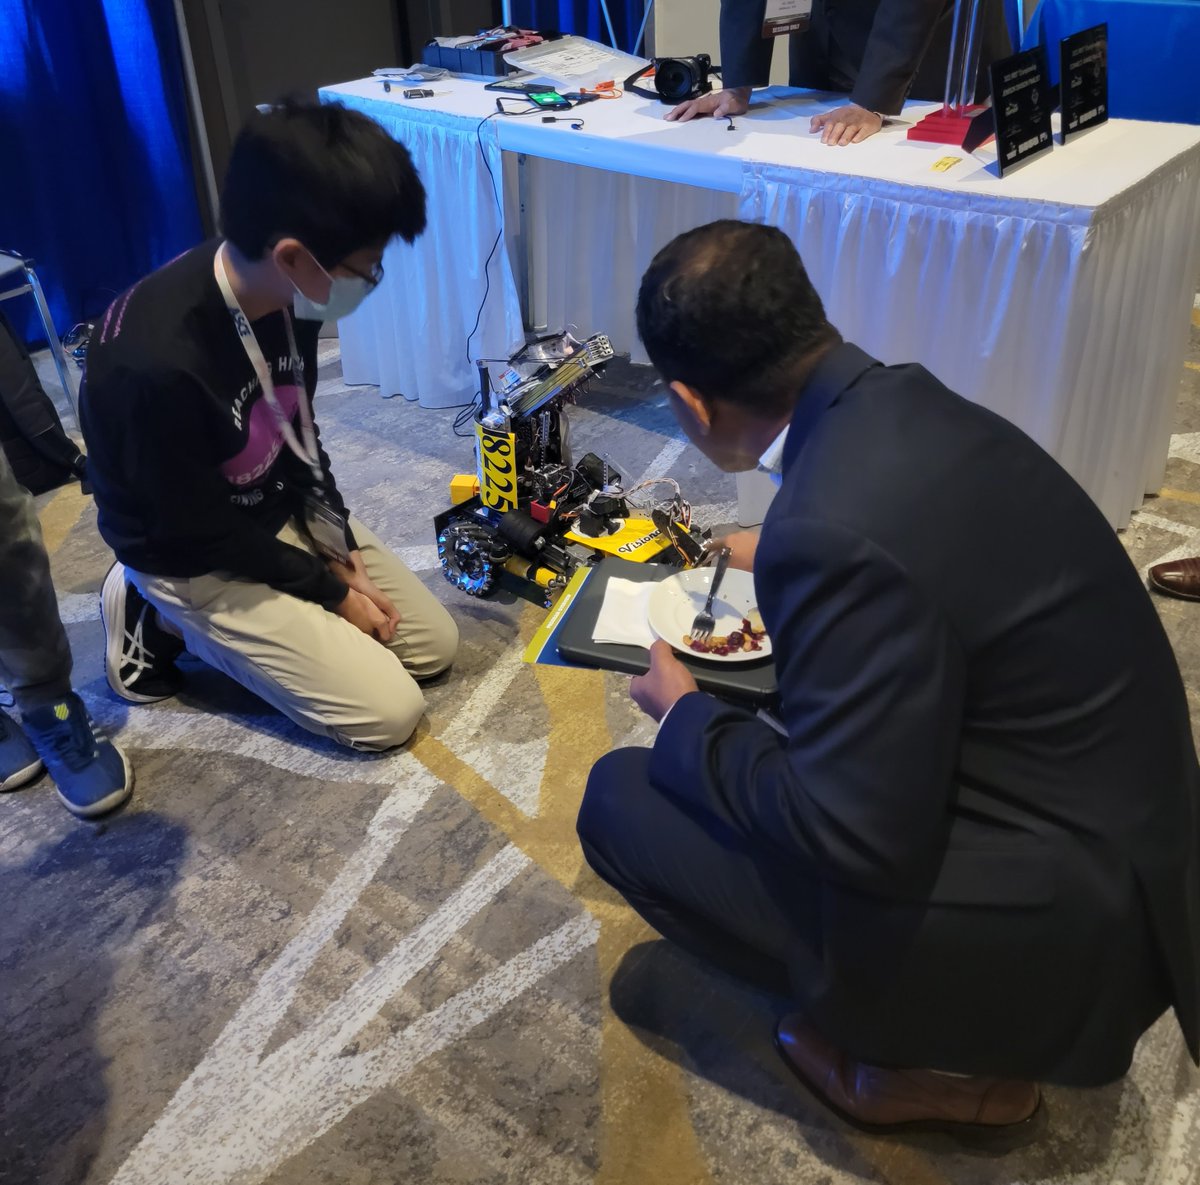 One of the coolest (of many!) photos from #ICTD22 - a young boy giving a robotics demonstration to attendees.